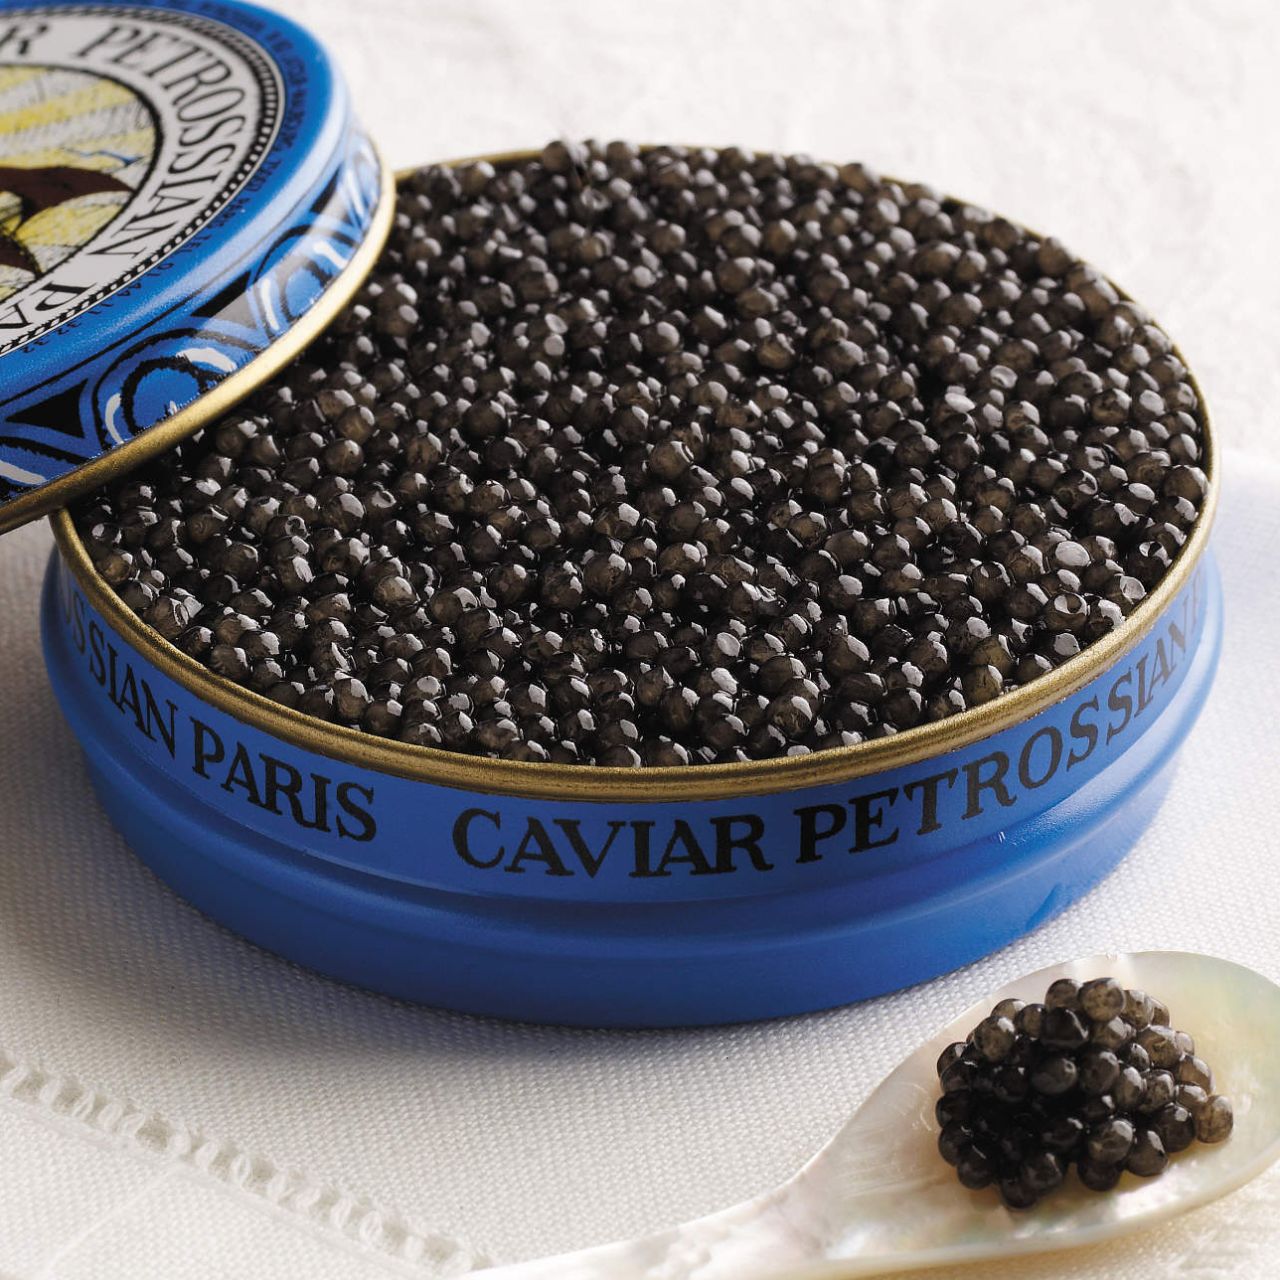 What matters is that when you do find your perfect tin of caviar, you are also buying the inevitable special memories that come with it, says Petrossian. "Whoever you share caviar with makes the experience even better," he says.